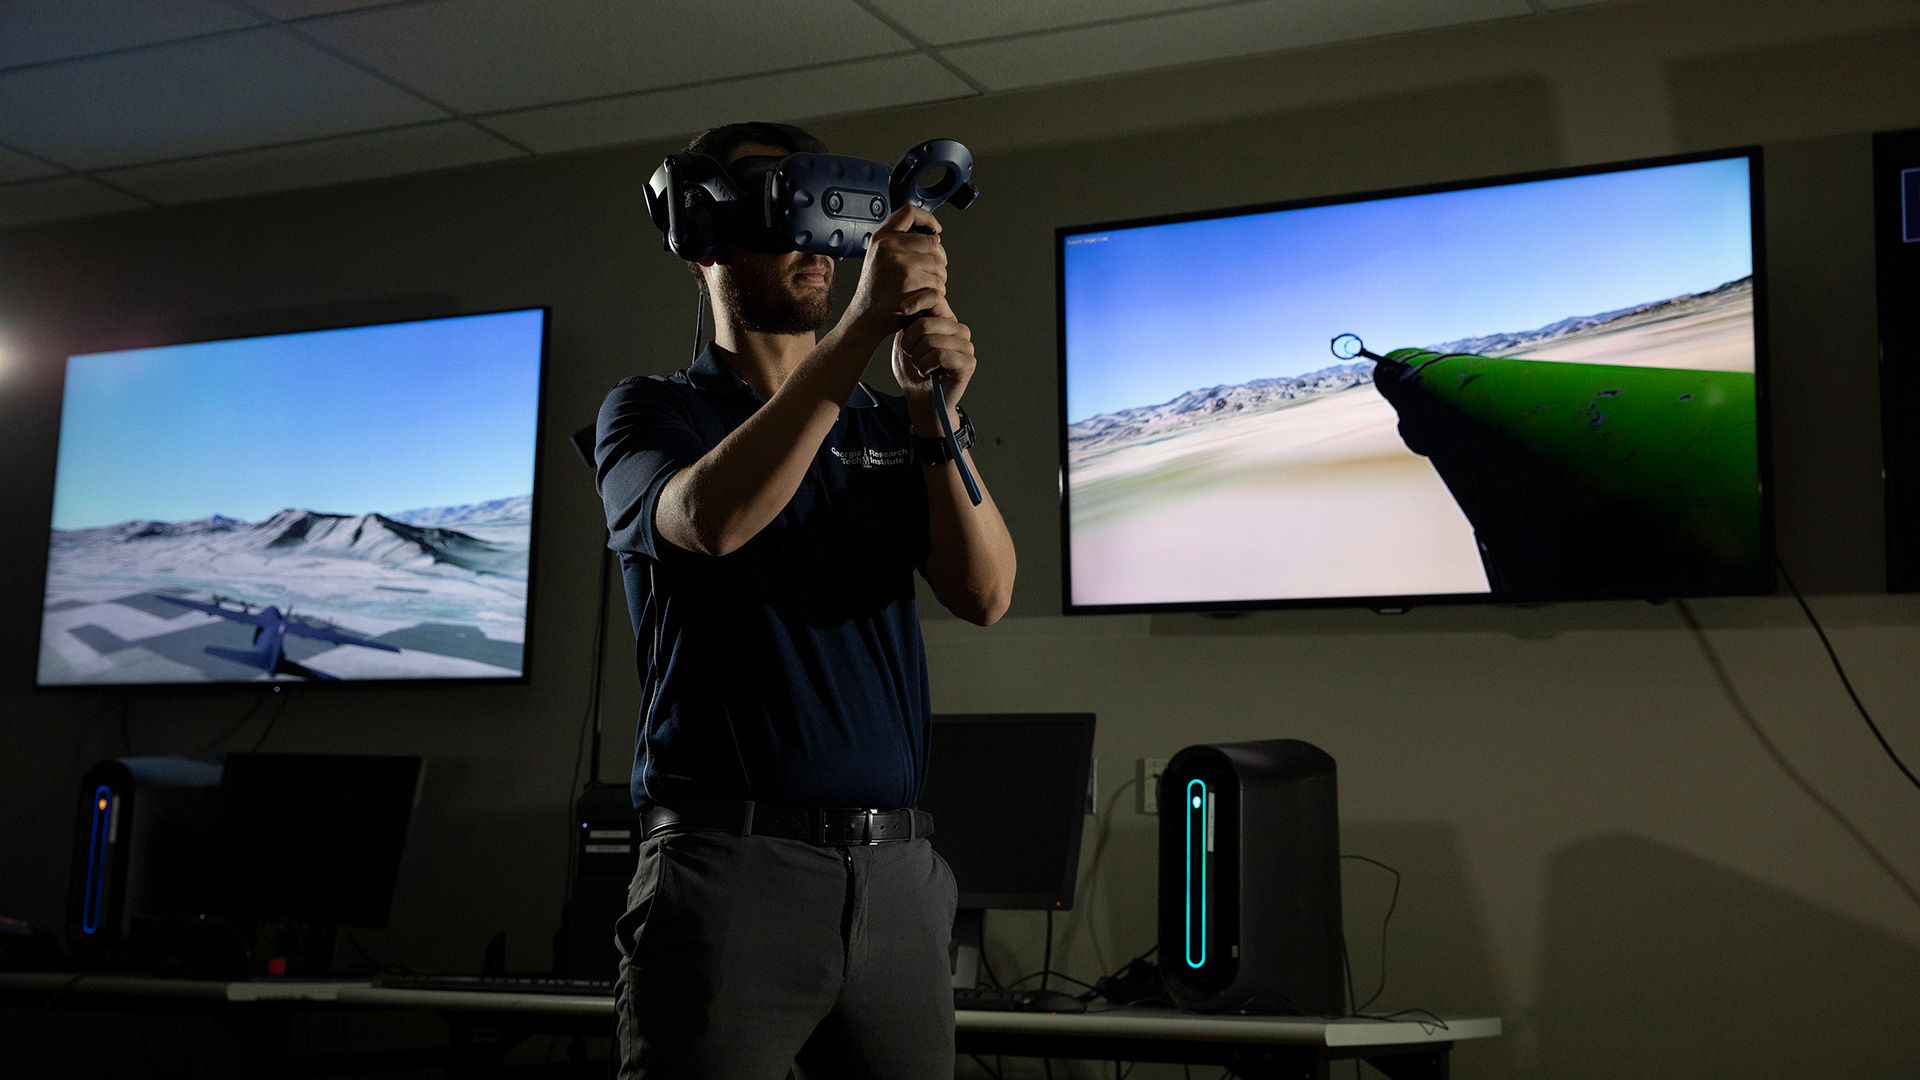 Male researcher standing in front of two large video monitors, wearing VR goggles and holding a control device in front of him